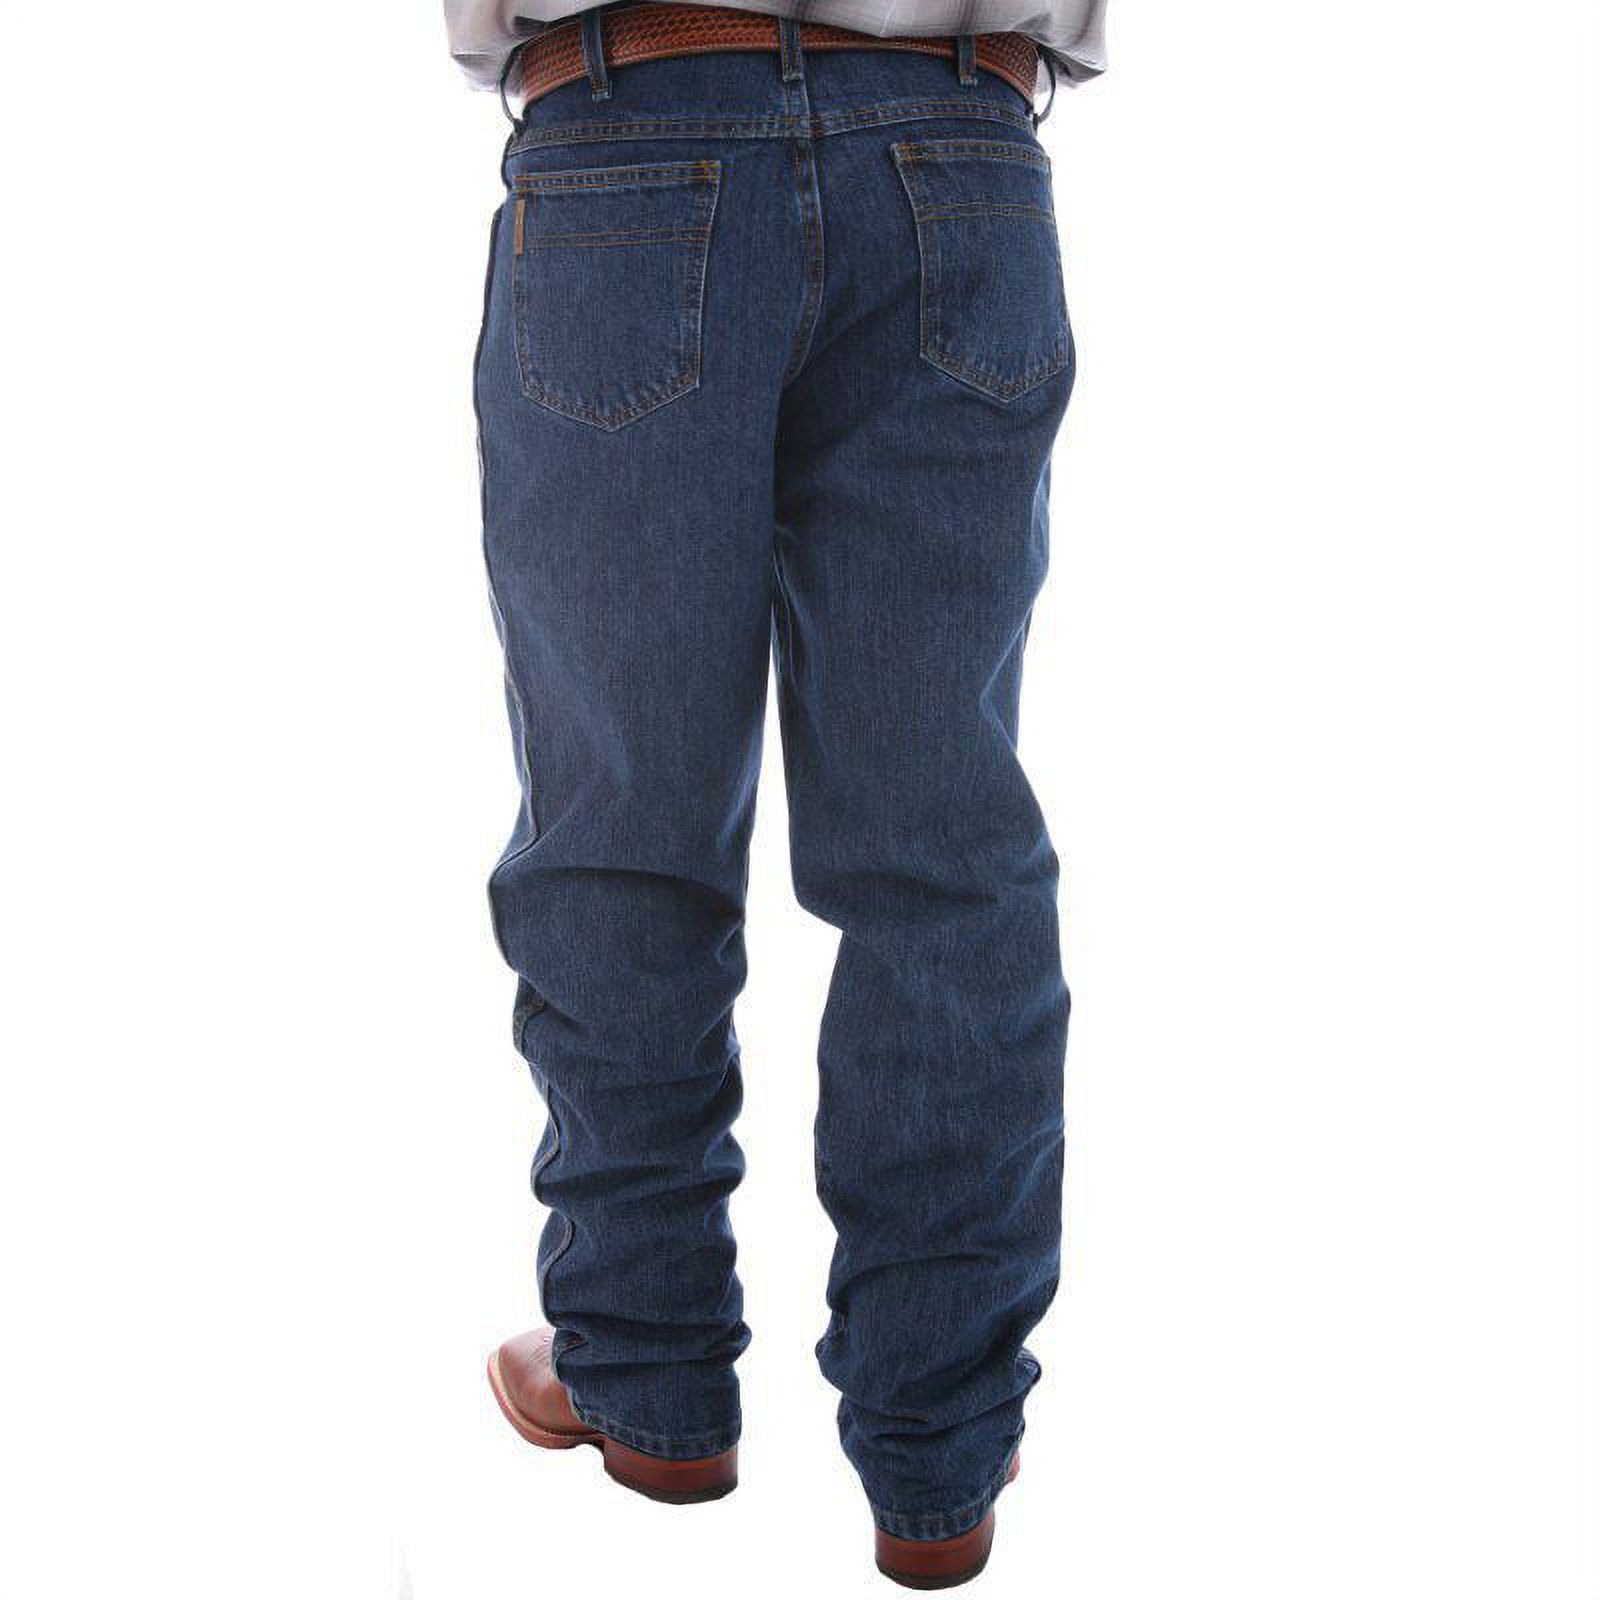 Cinch Men's Green Label Relaxed Fit Dark Stonewash Jeans Dark Stone 28W x 32L  US - image 1 of 4